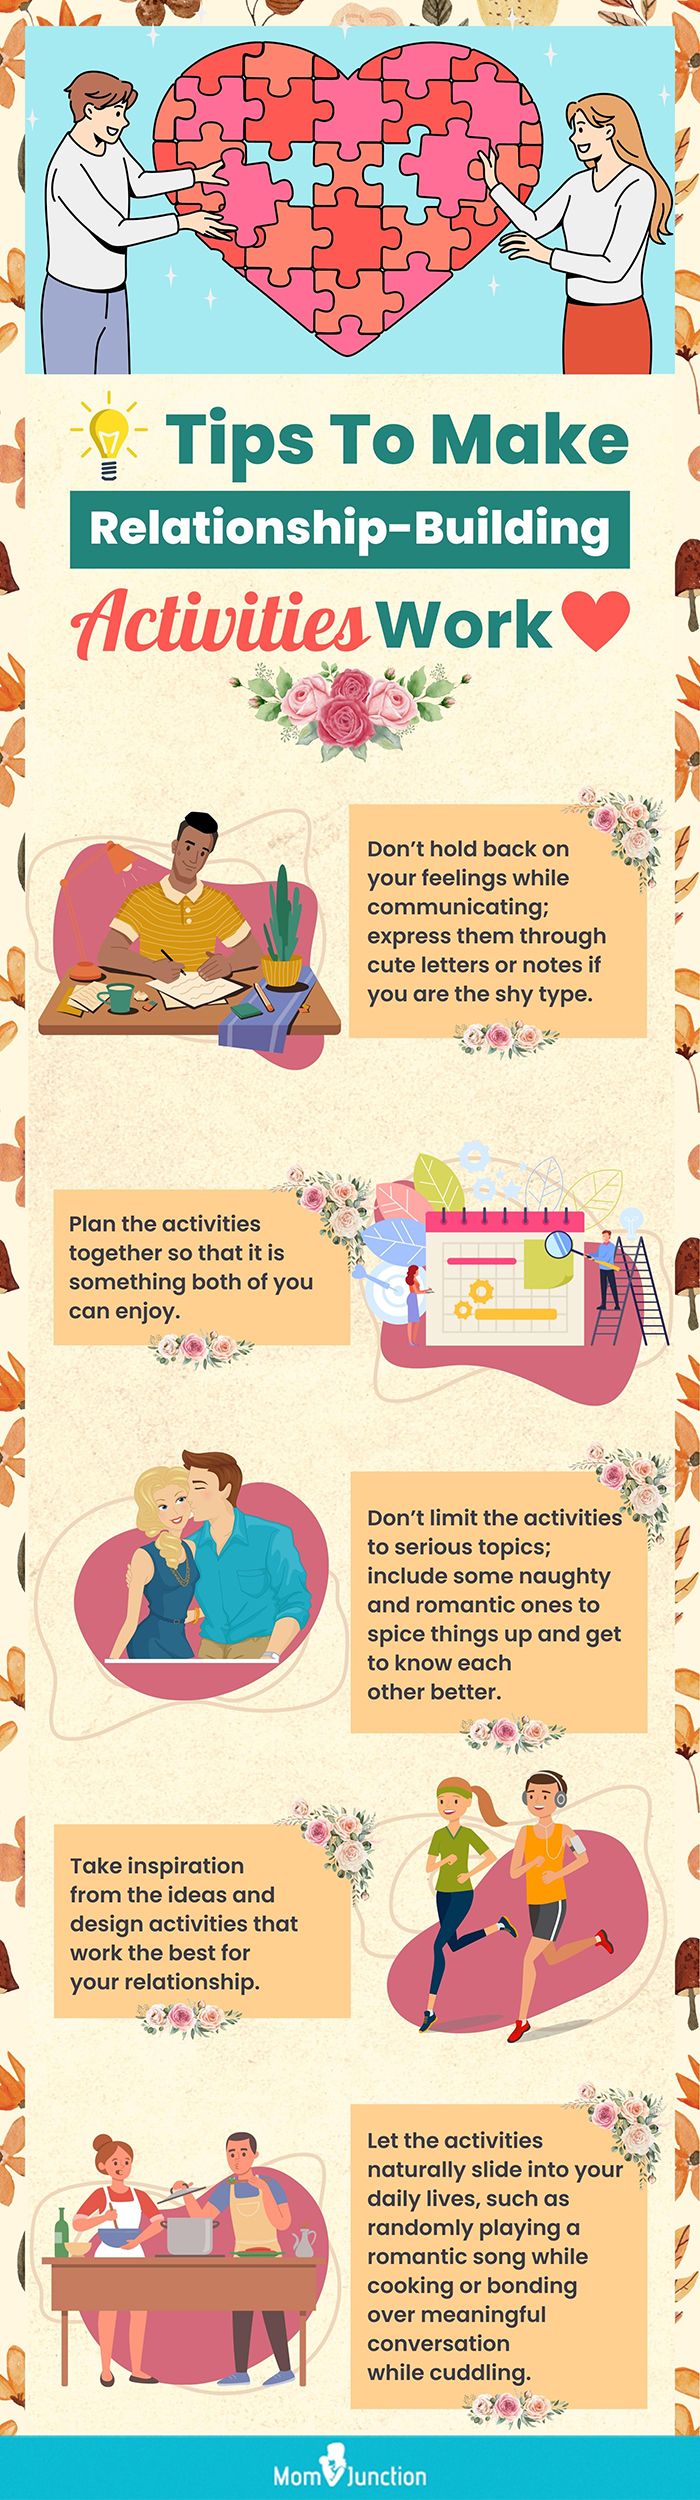 activities to strengthen your relationship (infographic)